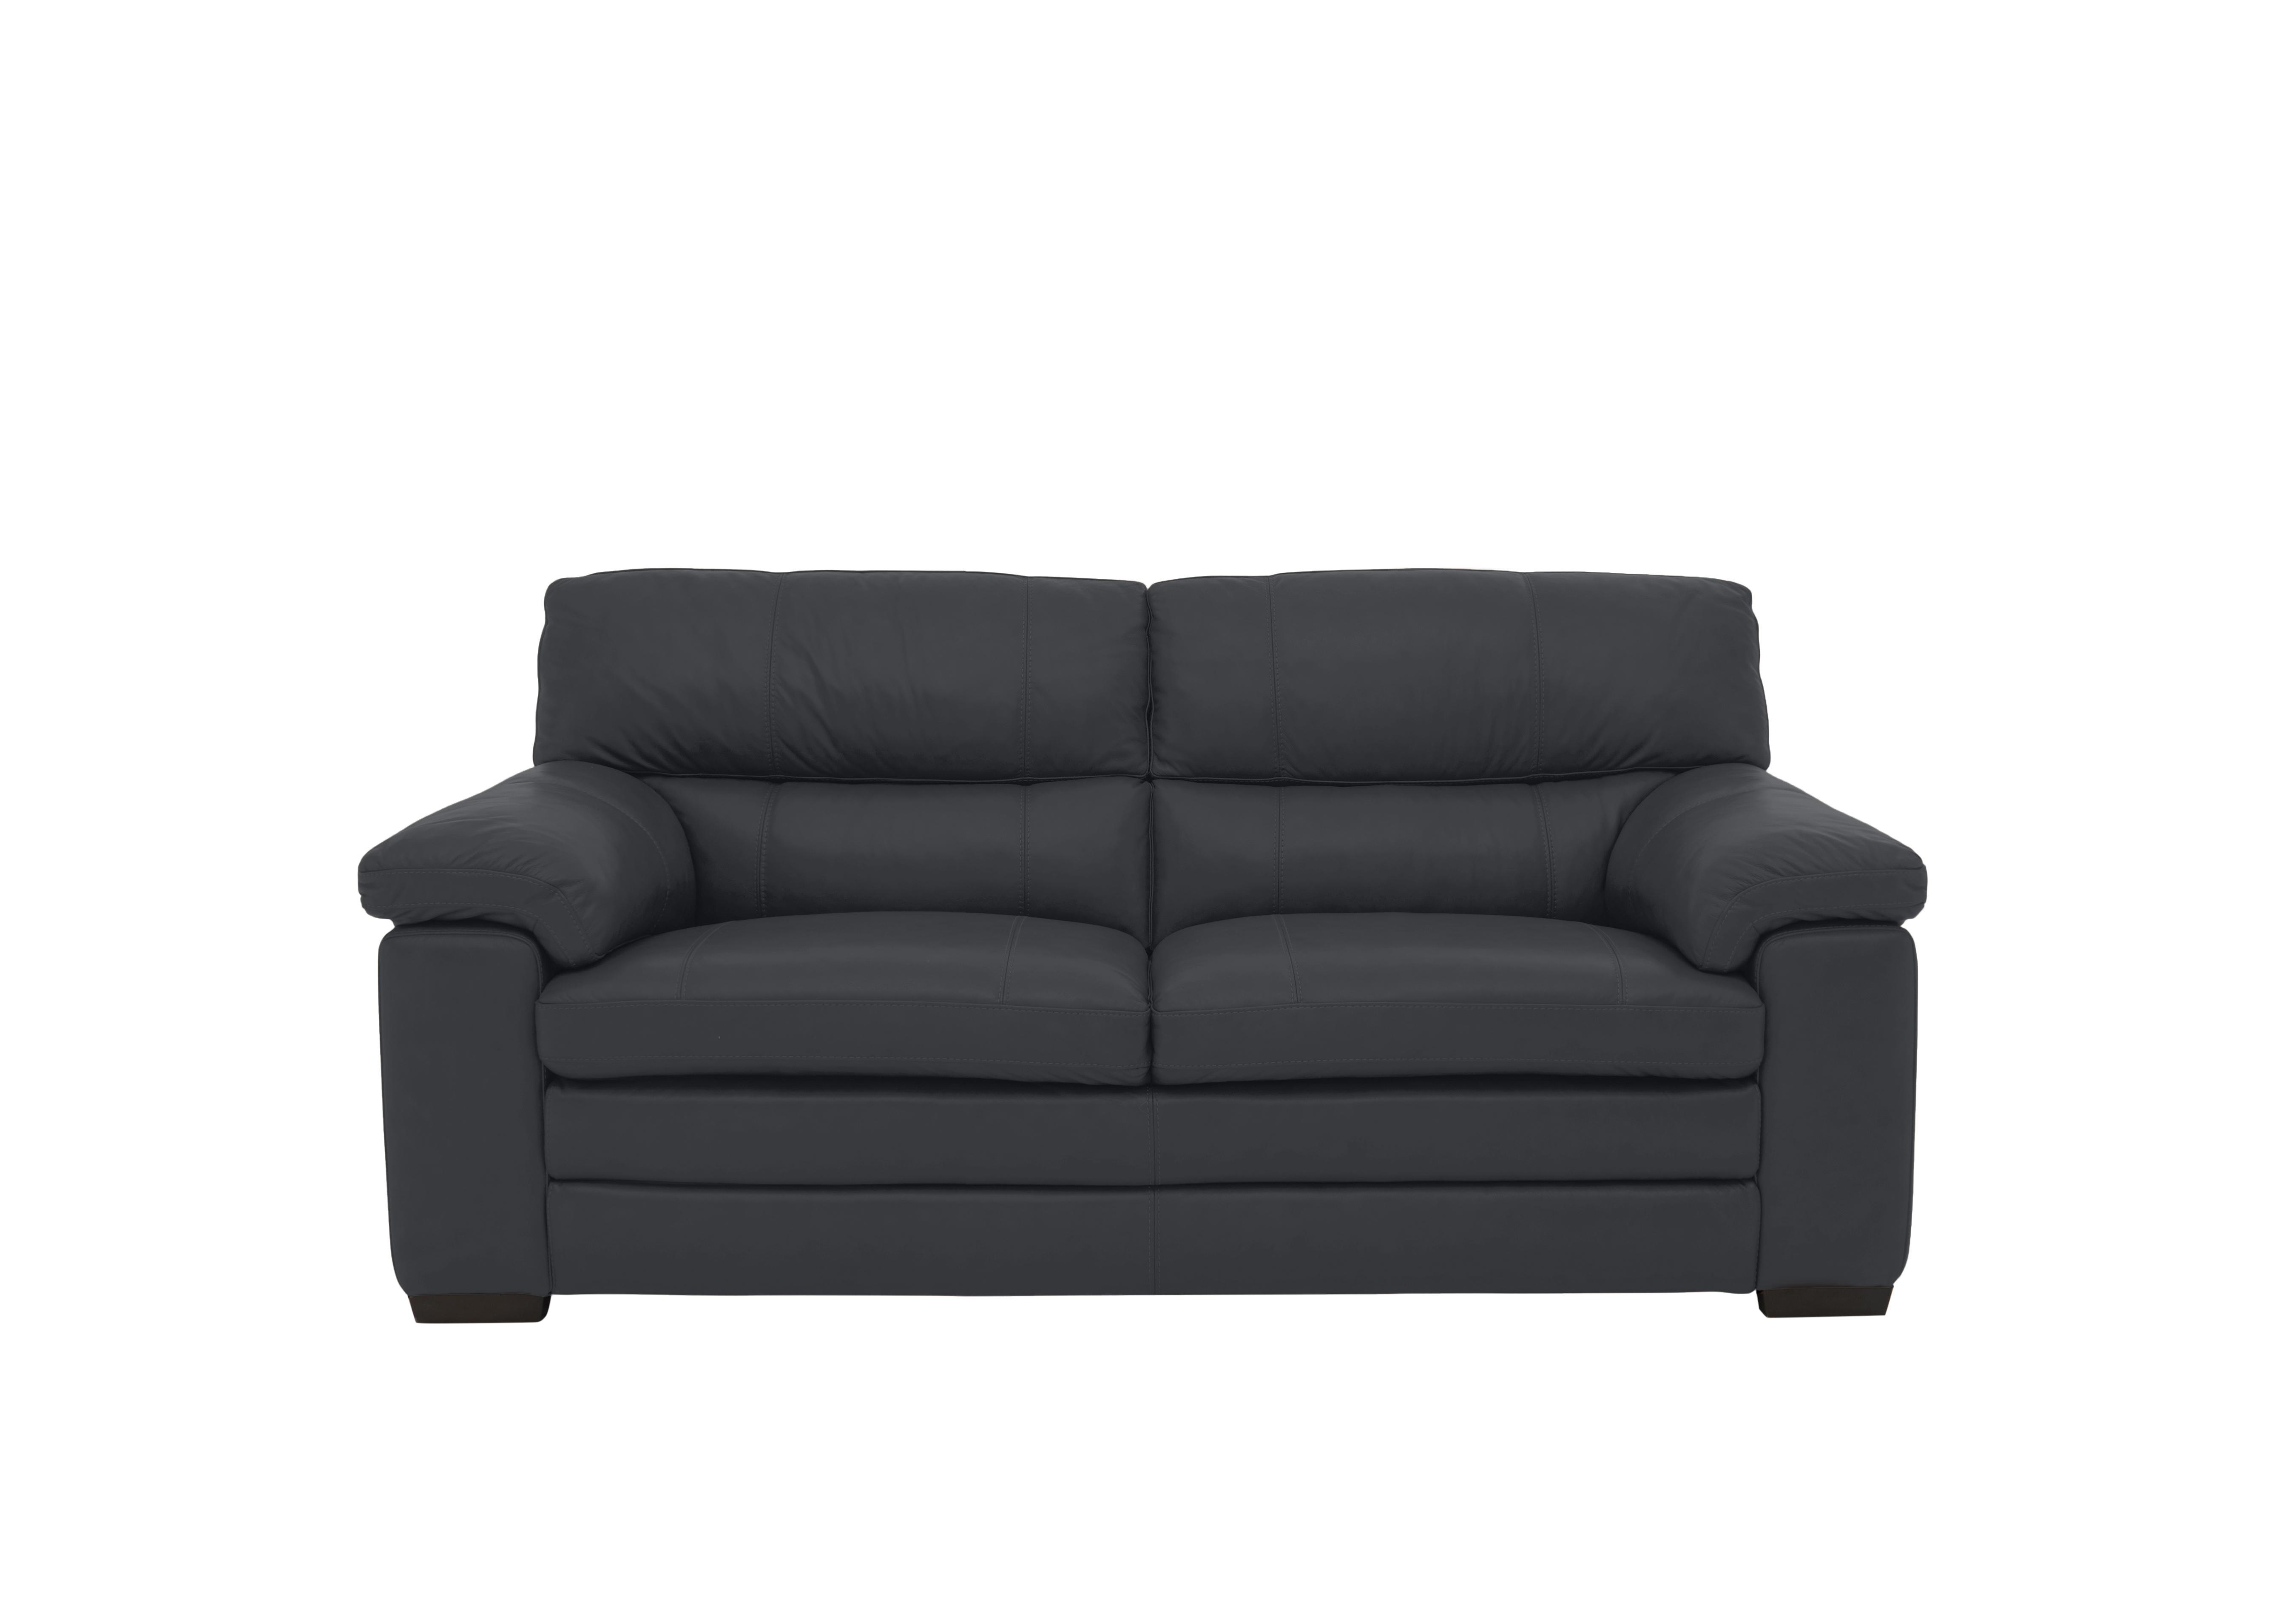 Cozee 2 Seater Pure Premium Leather Sofa in Nw-517e Shale Grey on Furniture Village